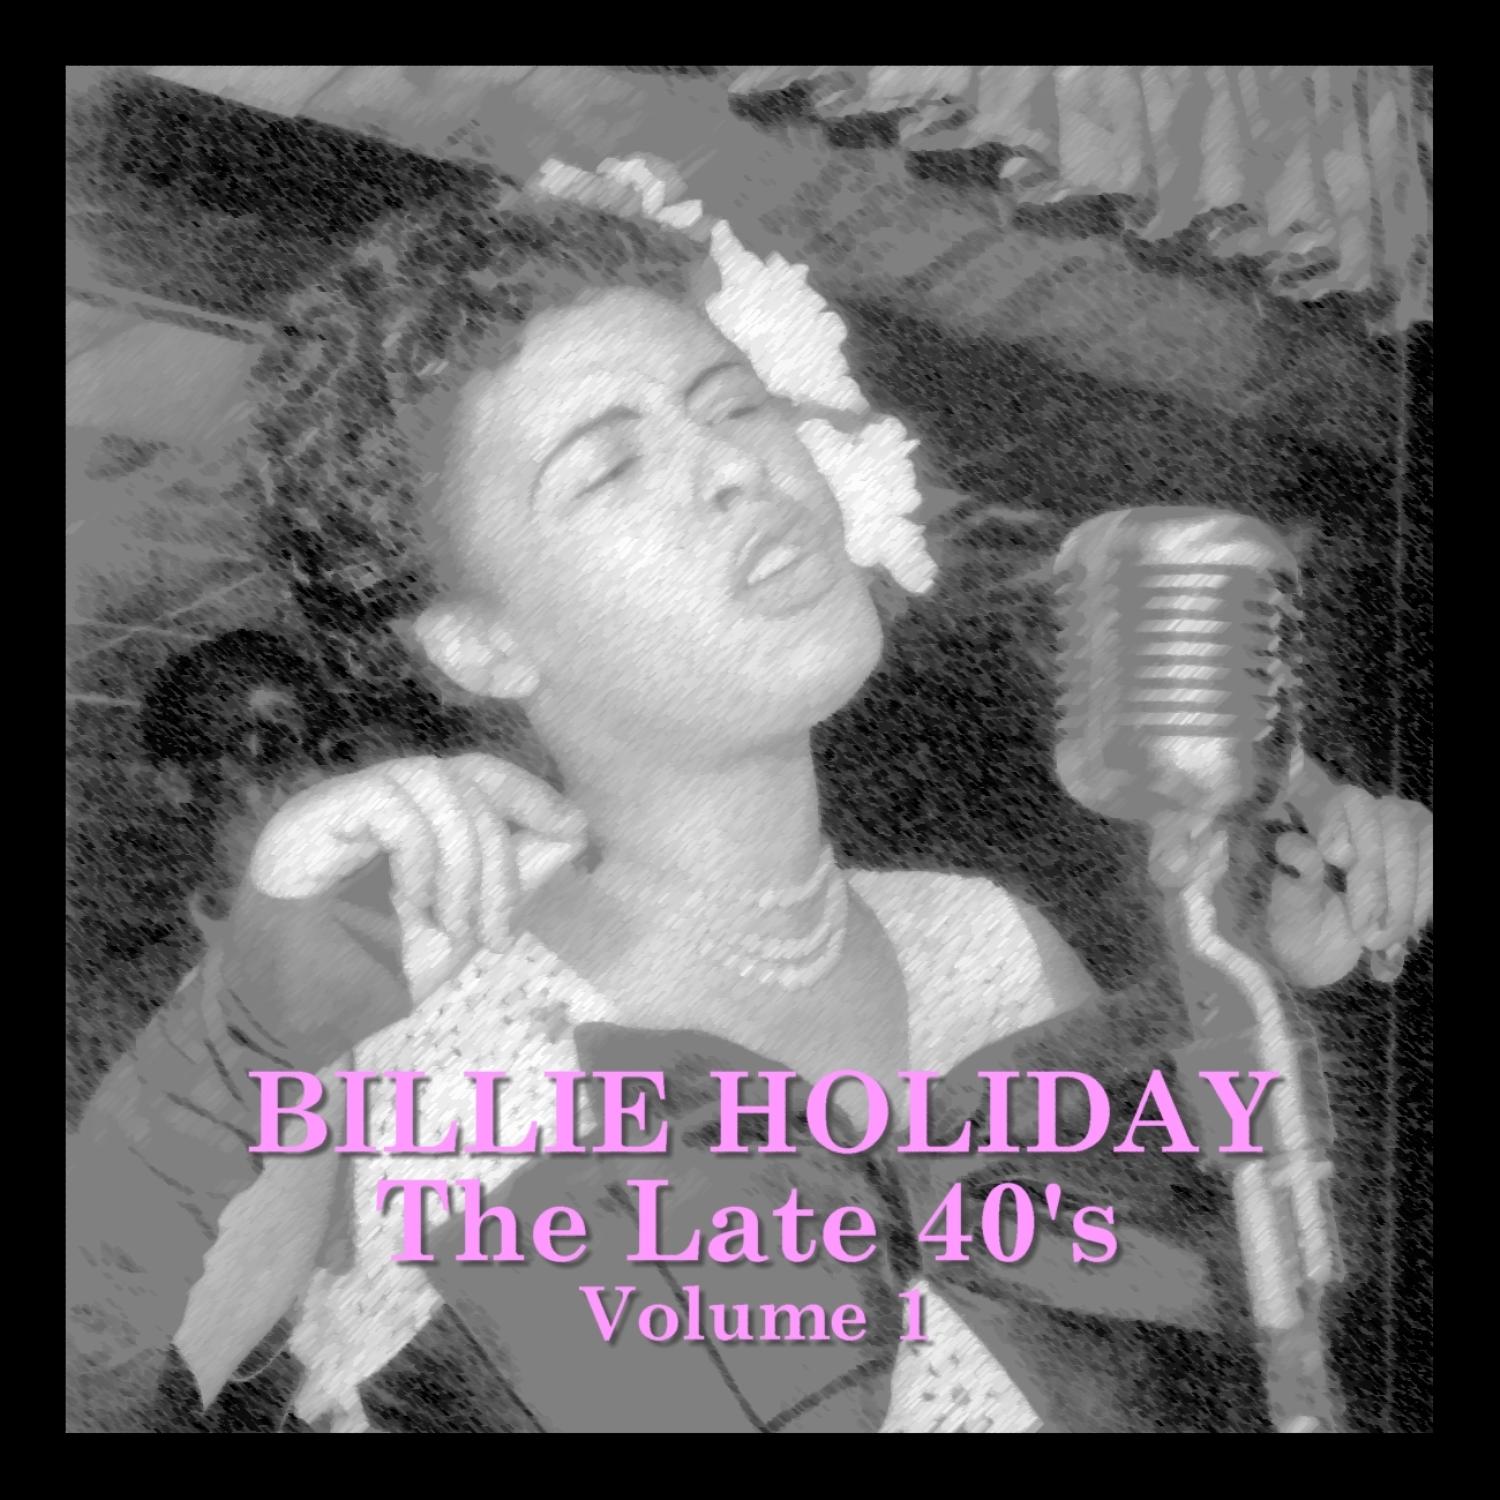 The Late 40s Vol 1